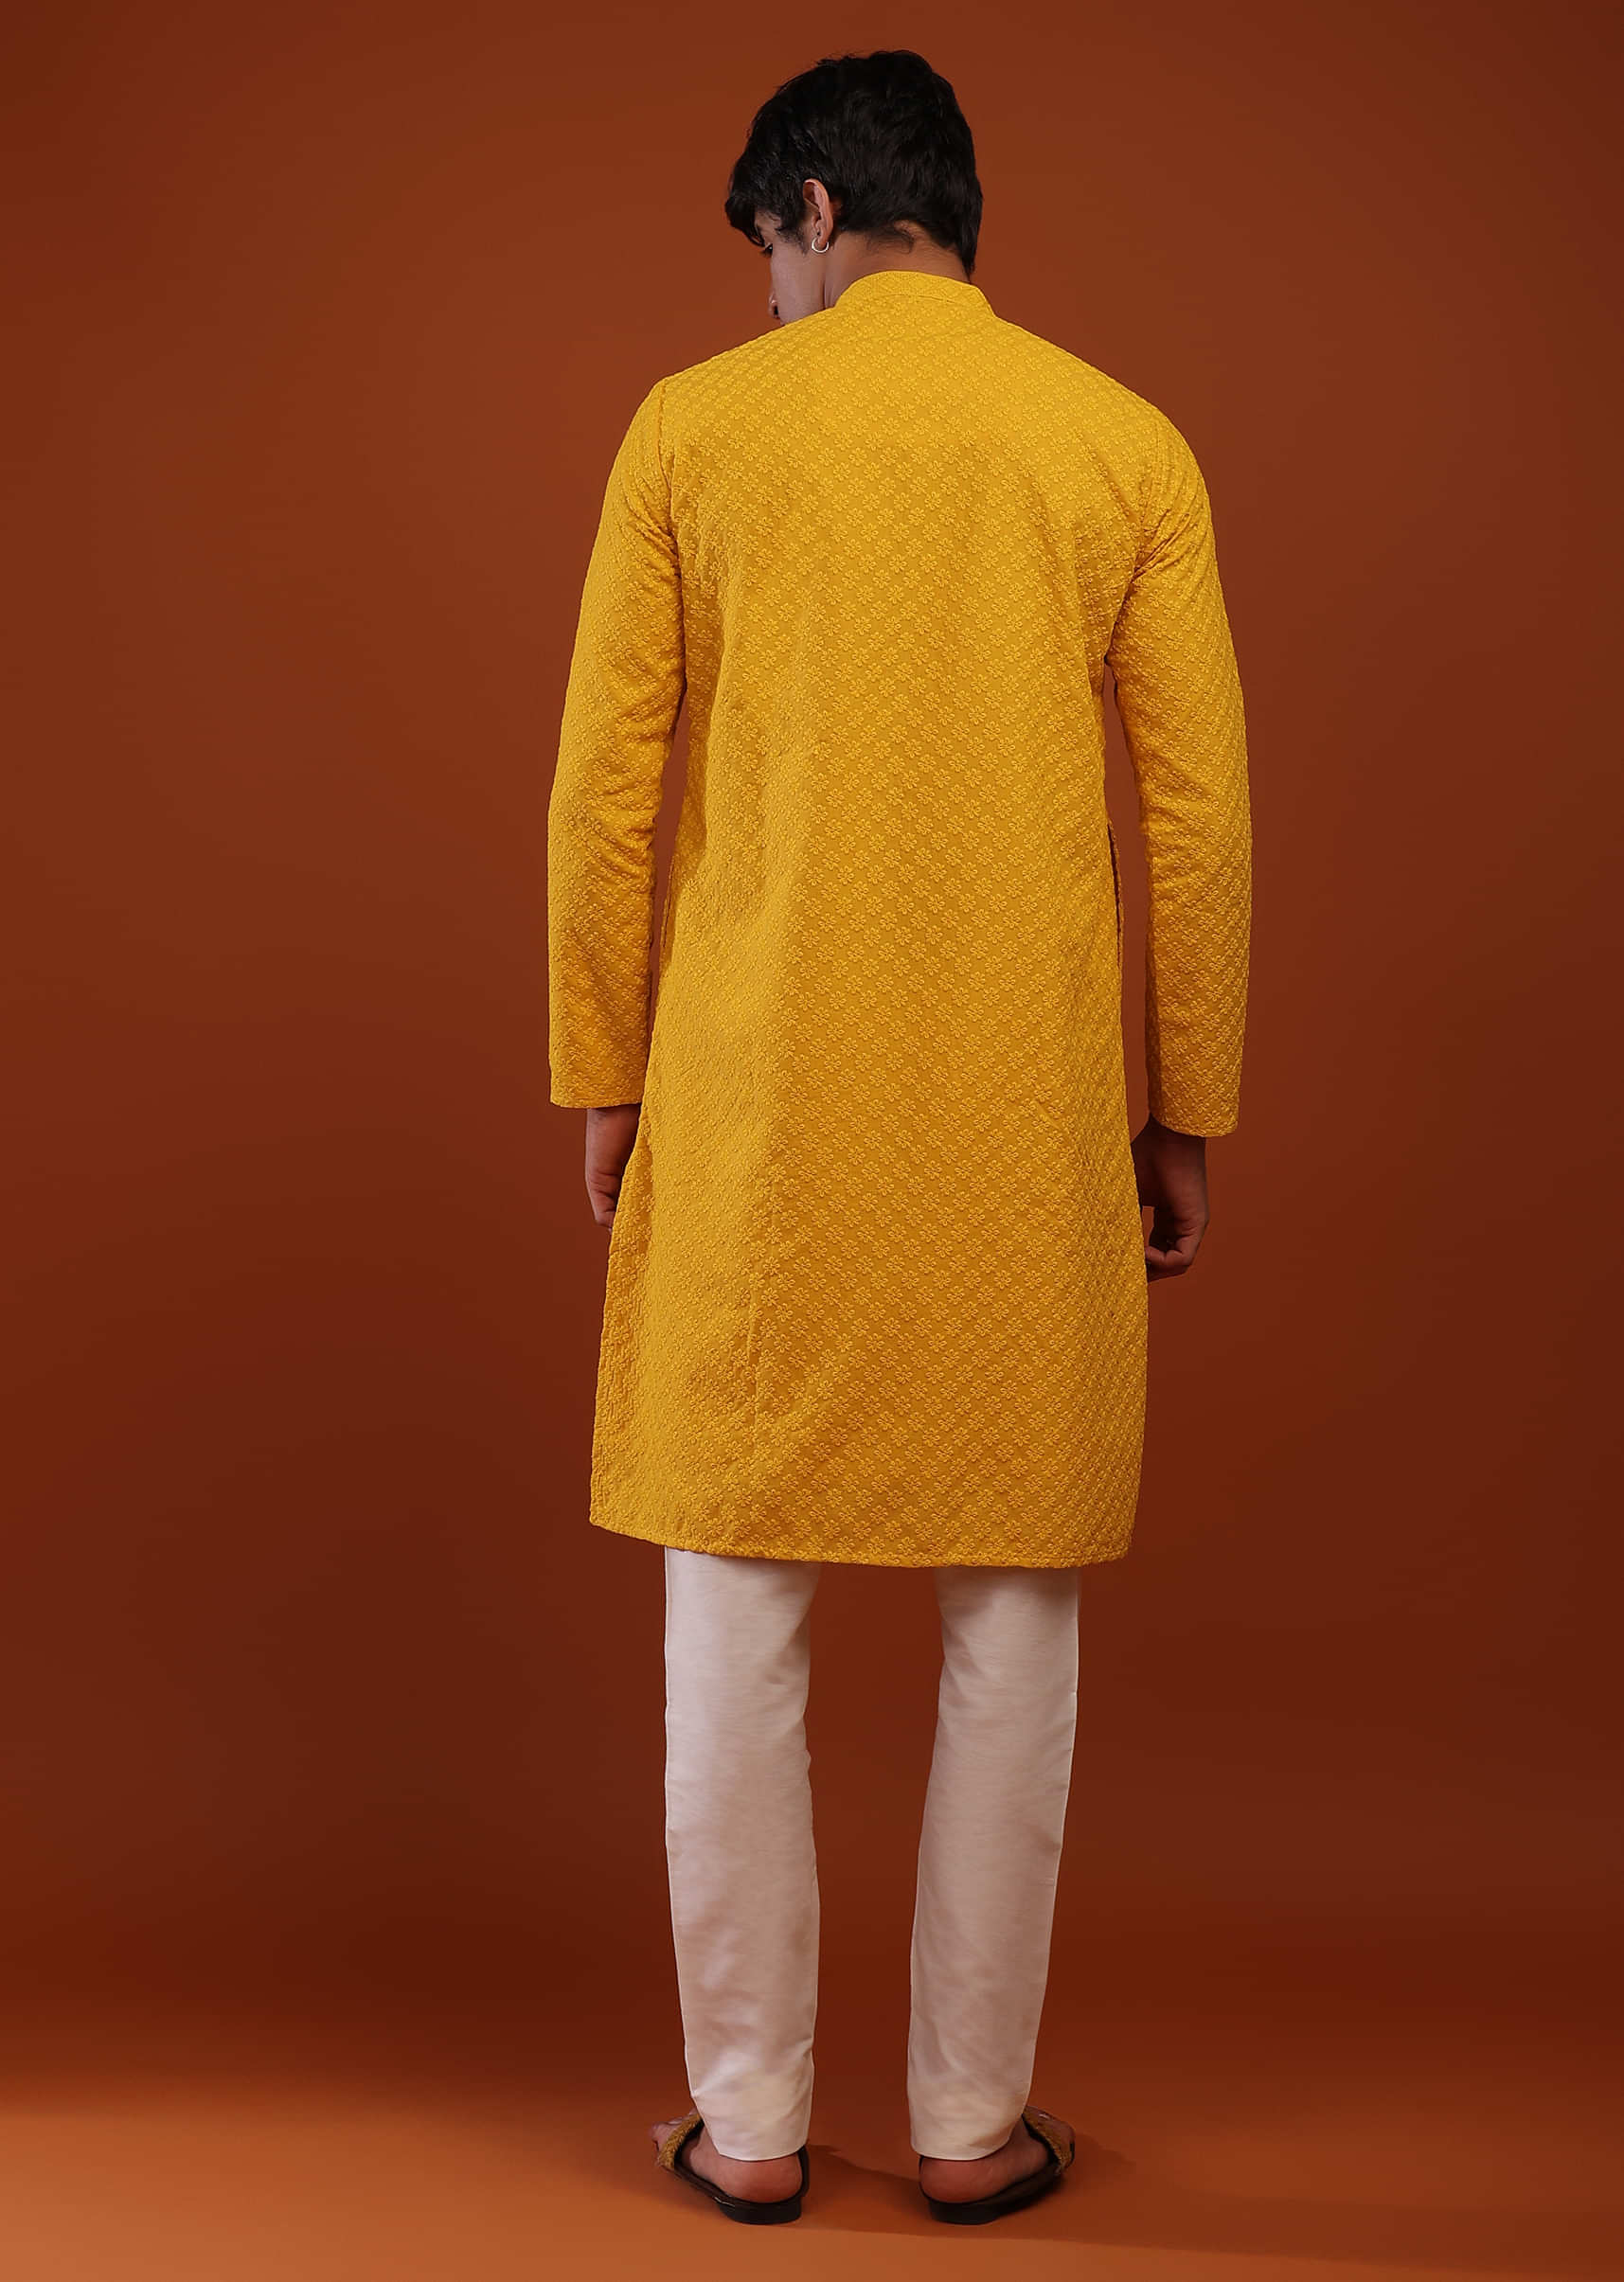 Chrome Yellow Raw Silk Kurta Set With Lucknowi Embroidery, Hook Closure And A Placket On The Yoke